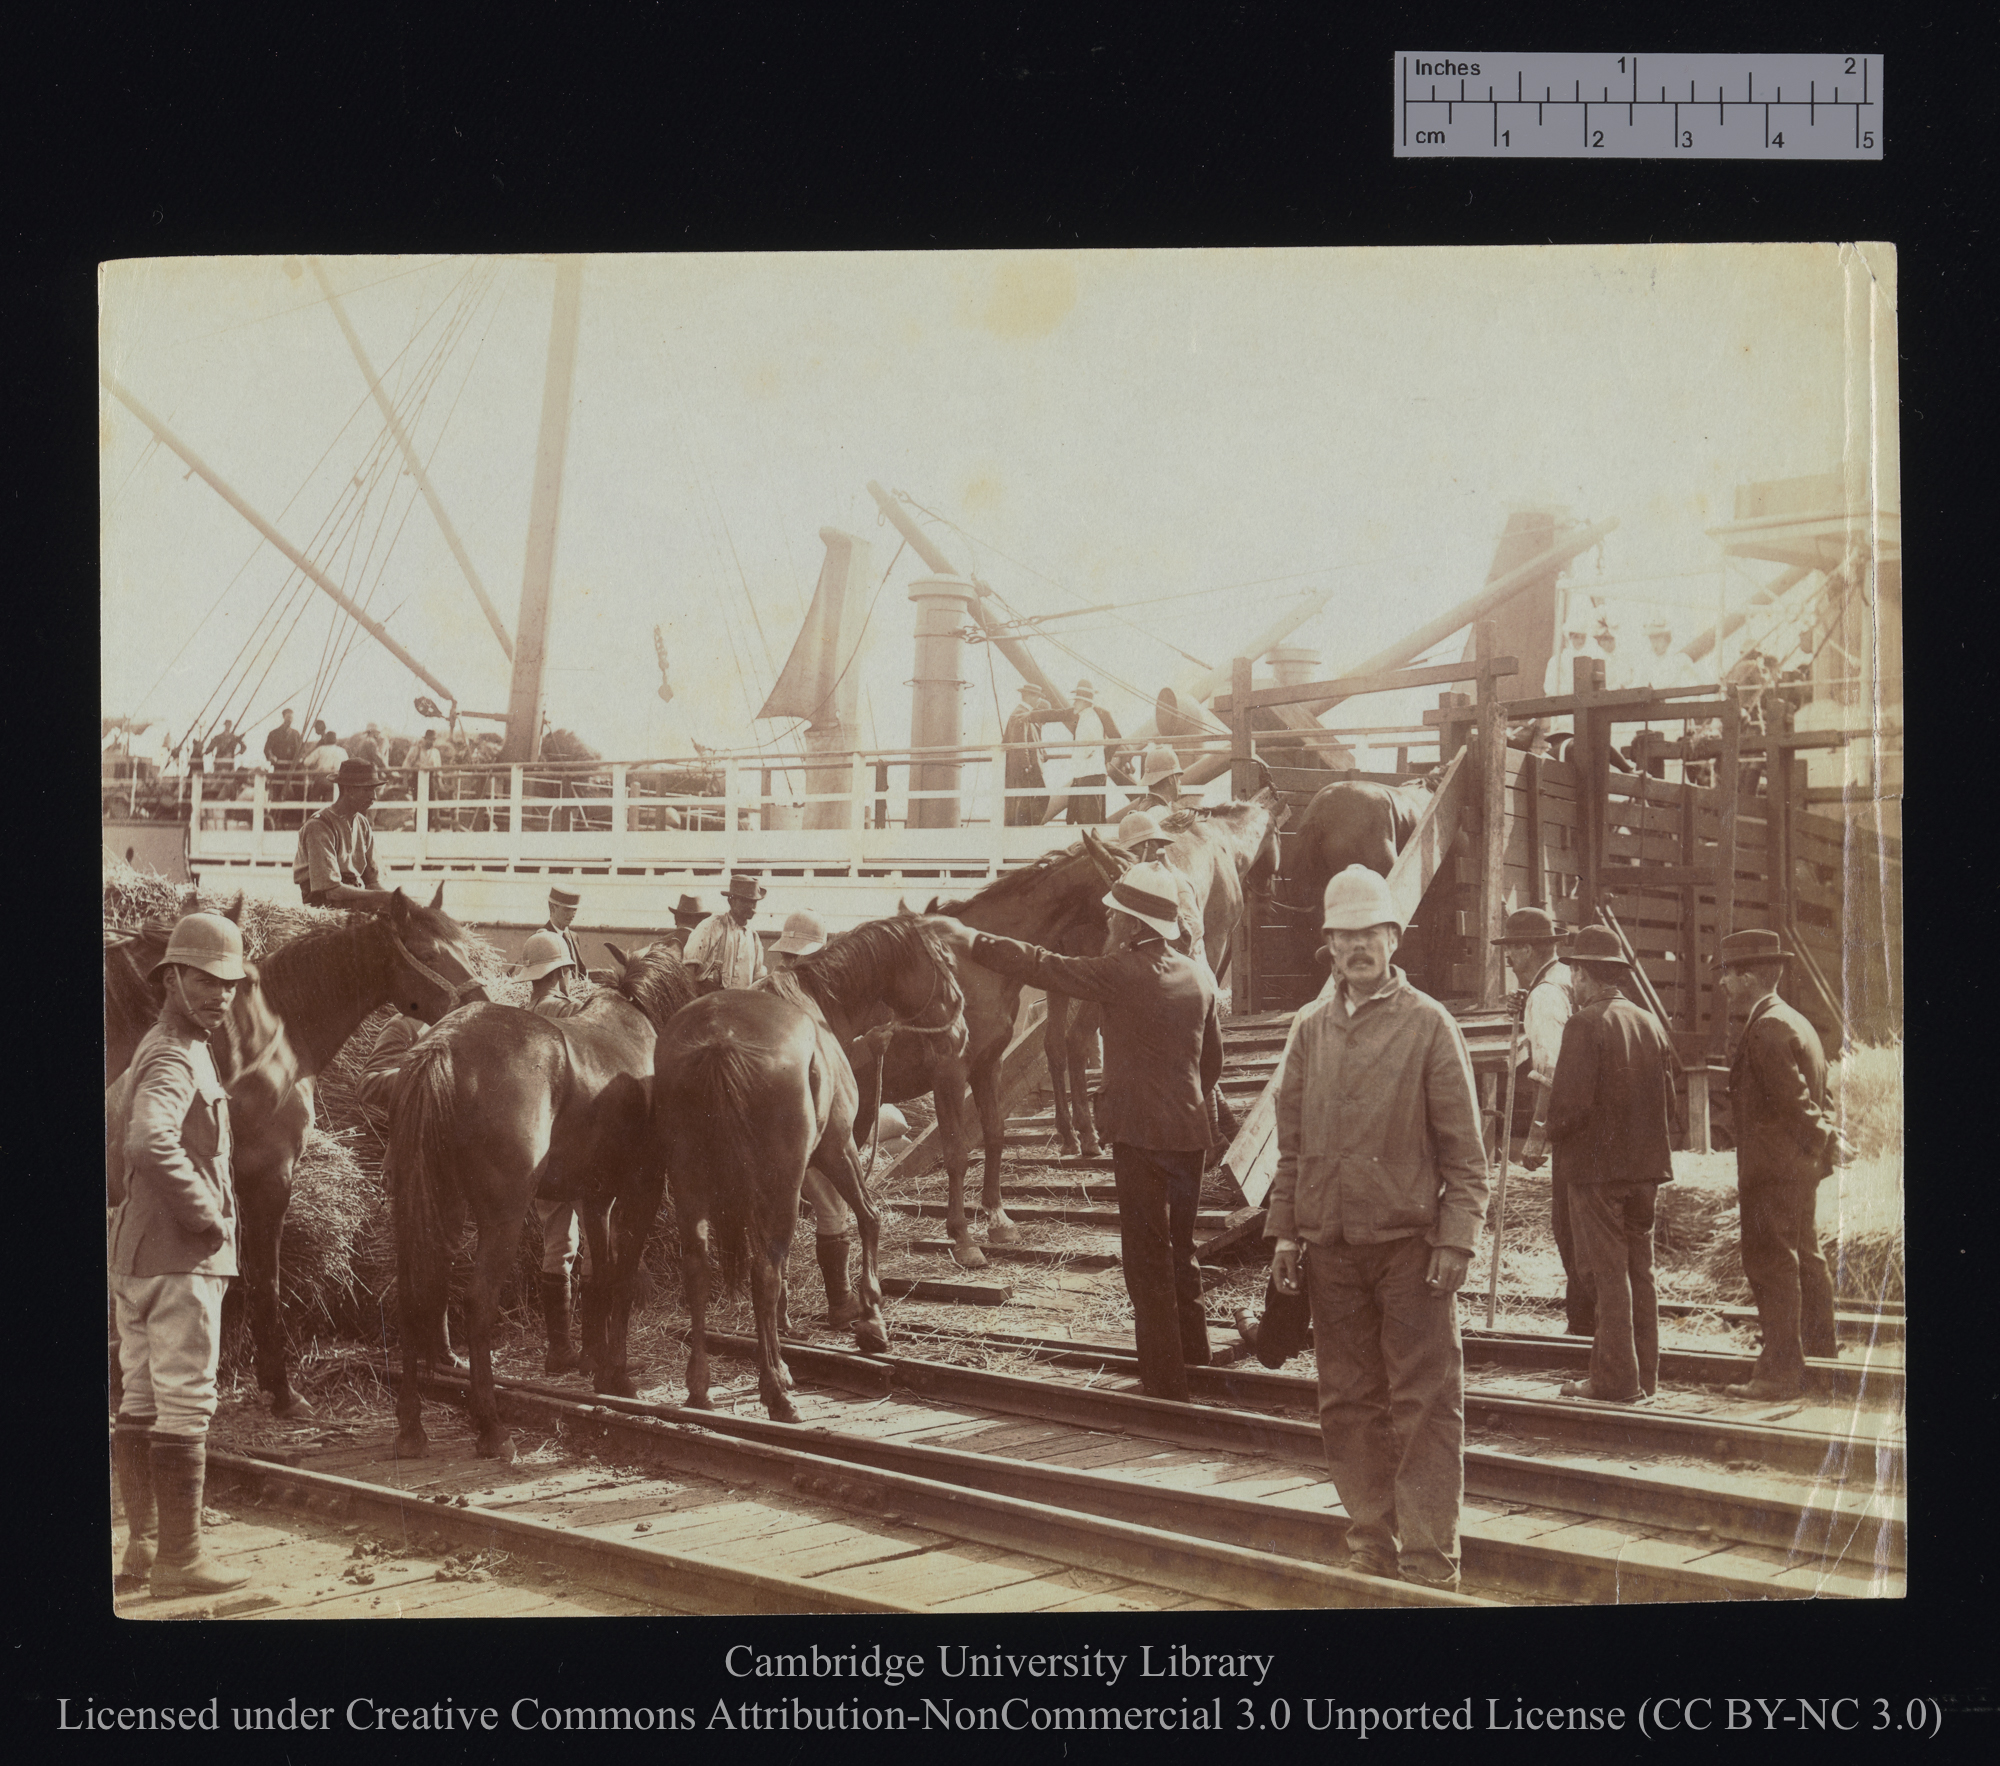 [Horses ascending gangway, seen from the shore], 1899 - 1901